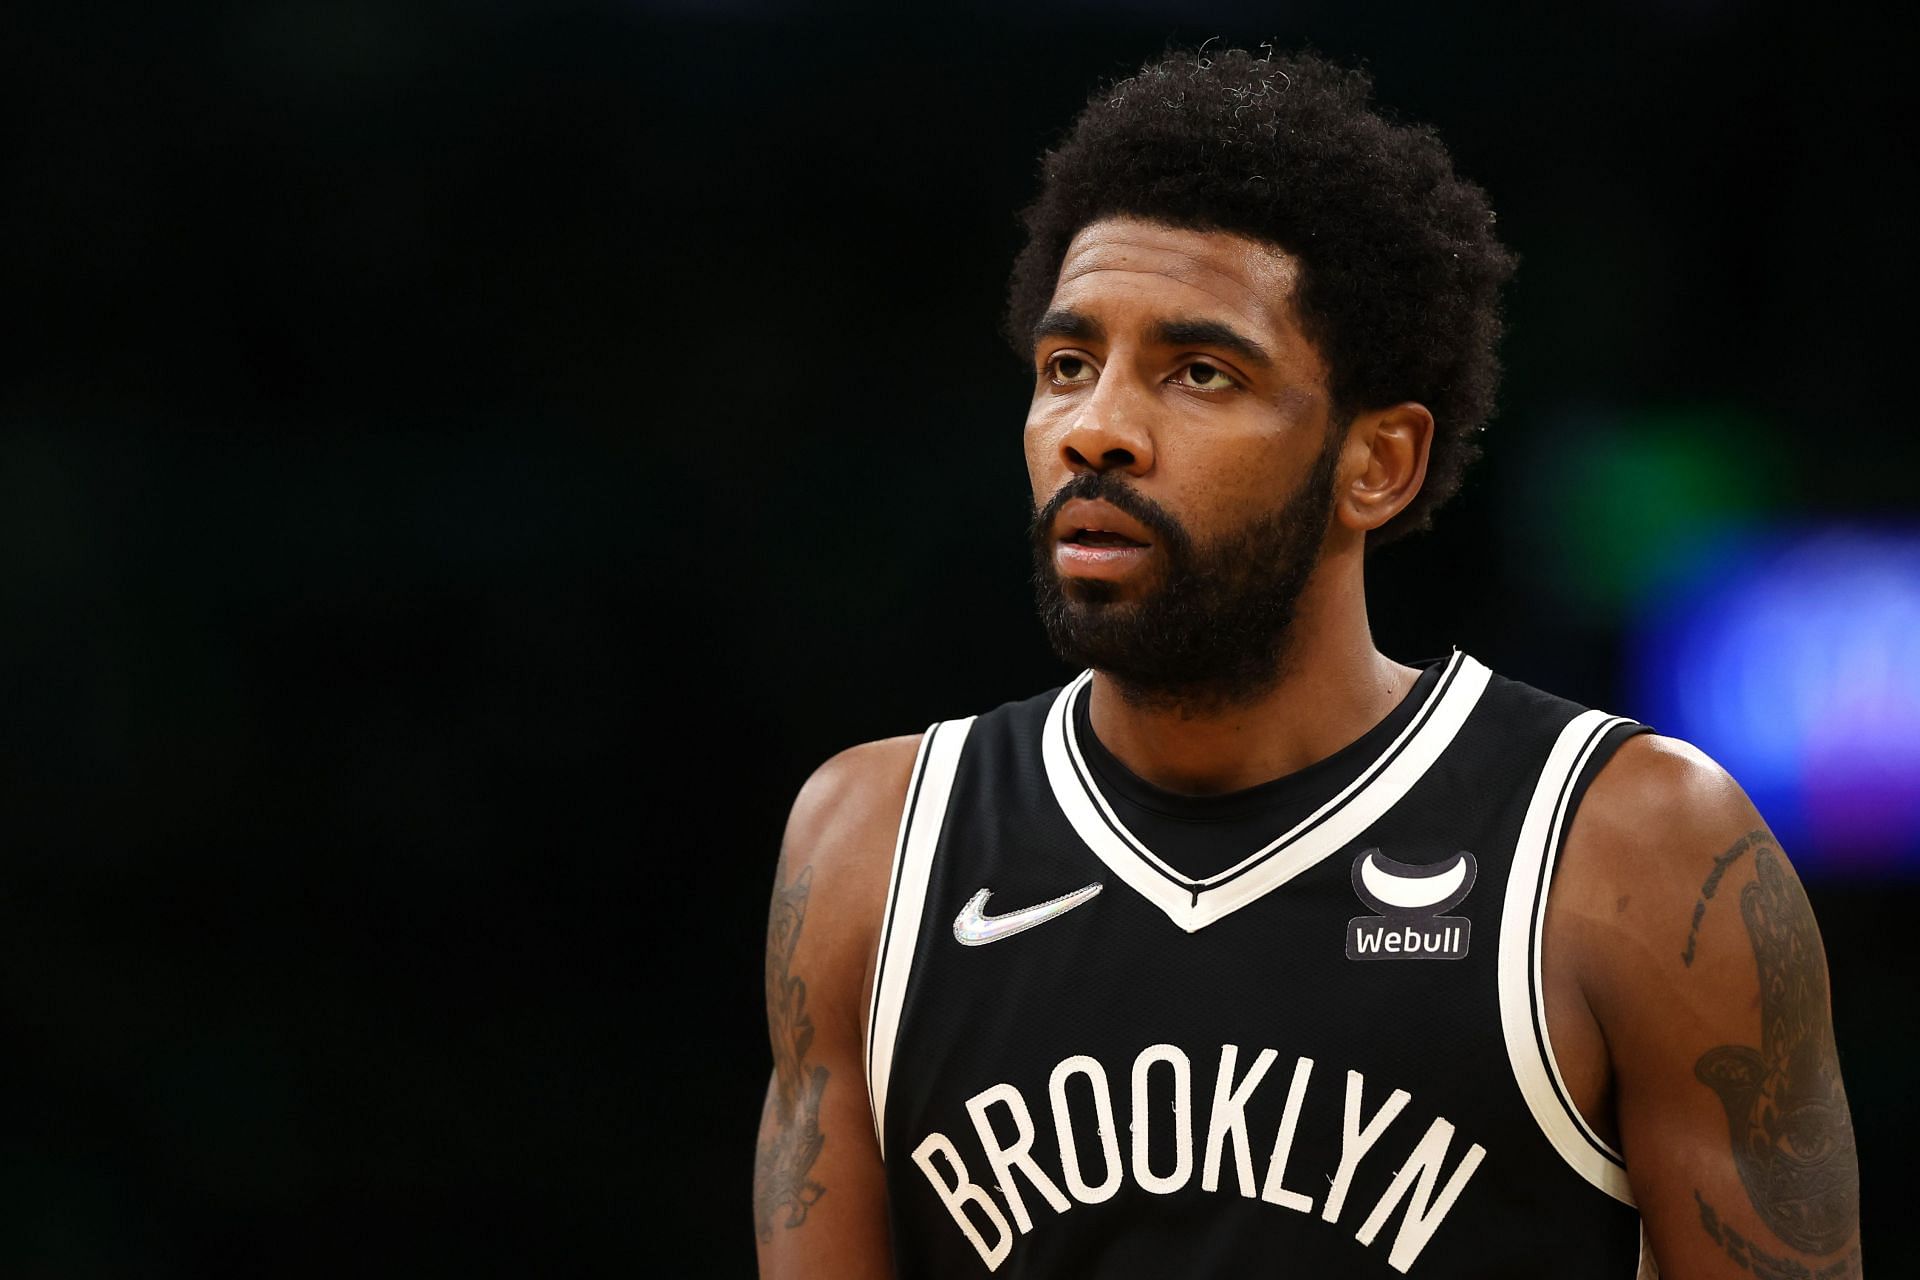 Kyrie Irving in action in Game 2 of the Brooklyn Nets and Boston Celtics series